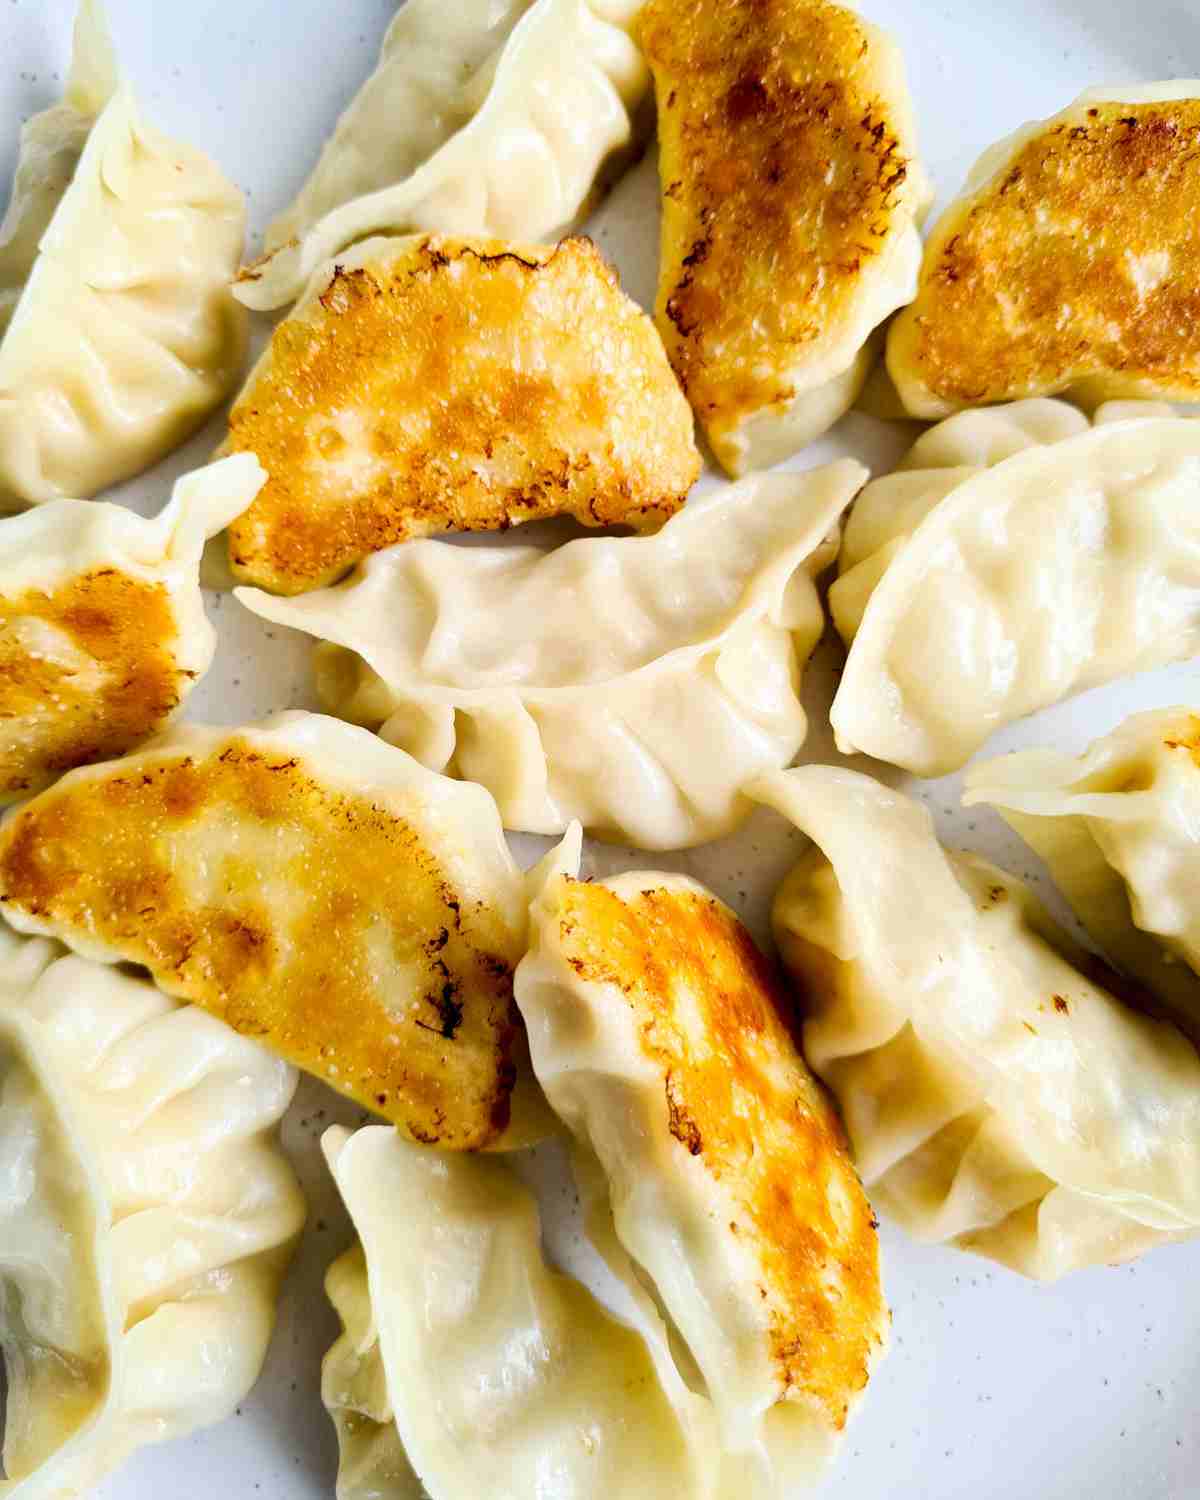 Close up of pan fried dumplings with half turned upside down revealing crispy and golden bottoms